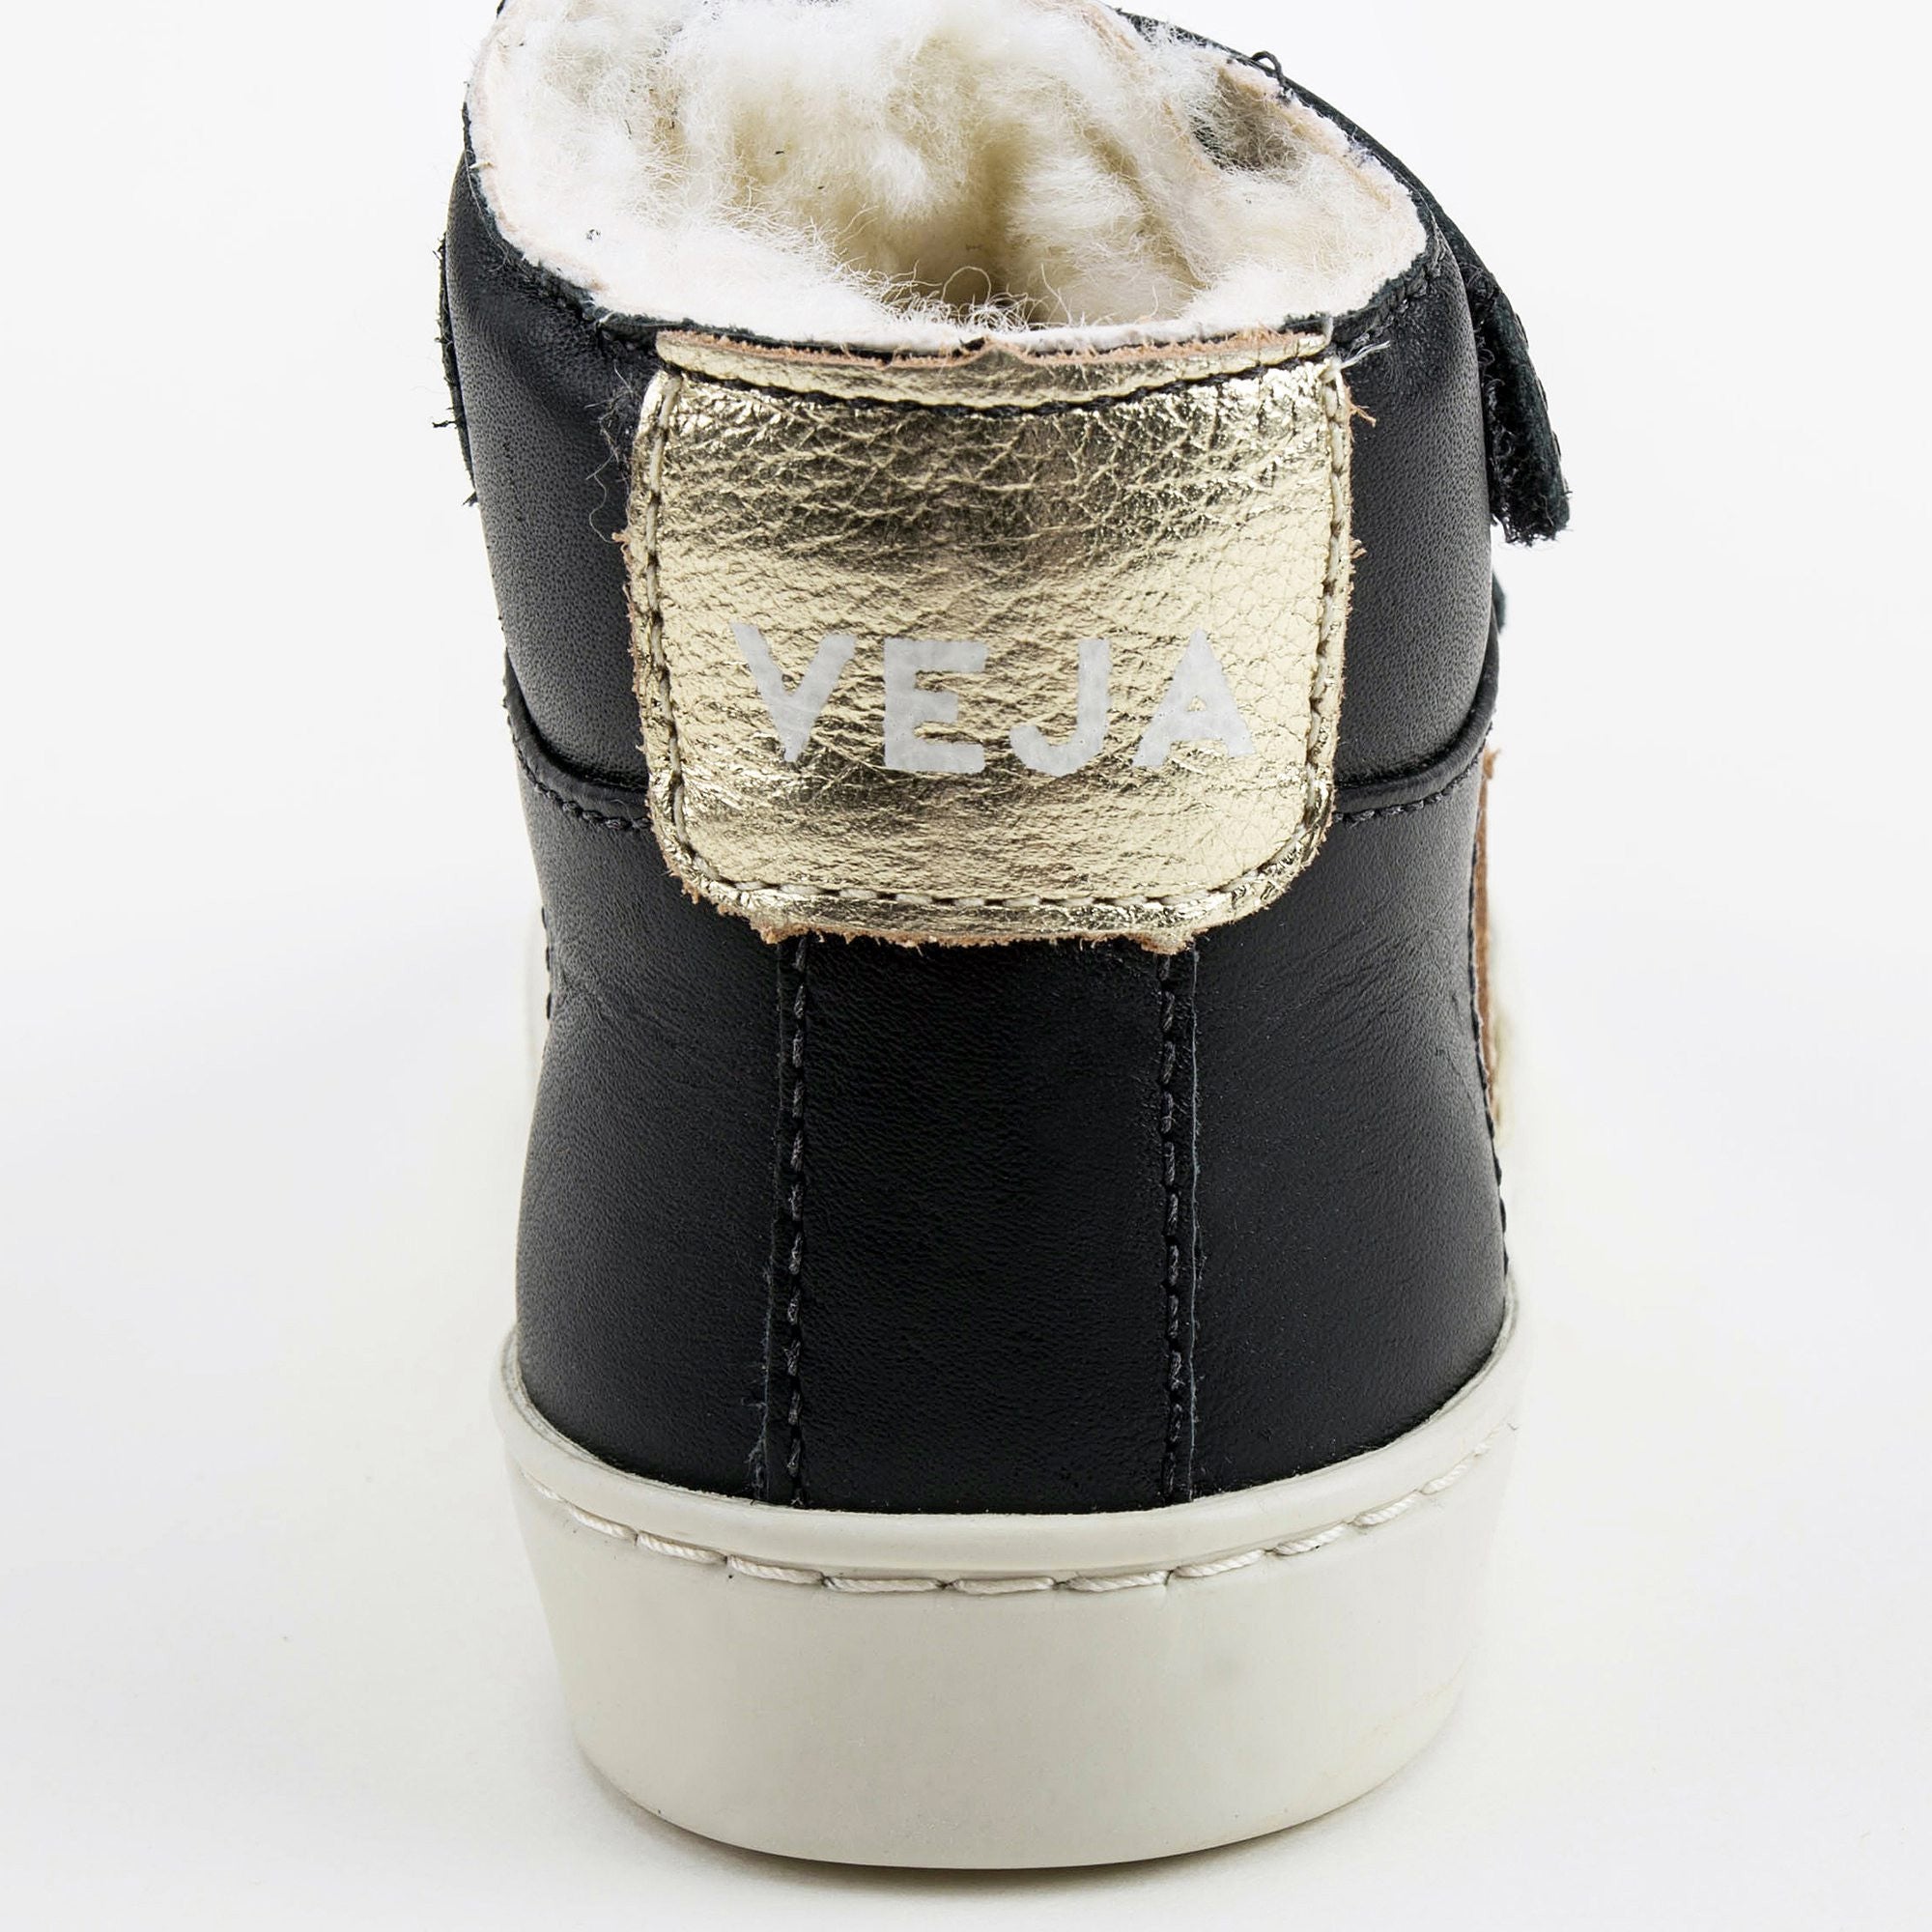 Boys & Girls Black Velcro Leather Shoes With Fur